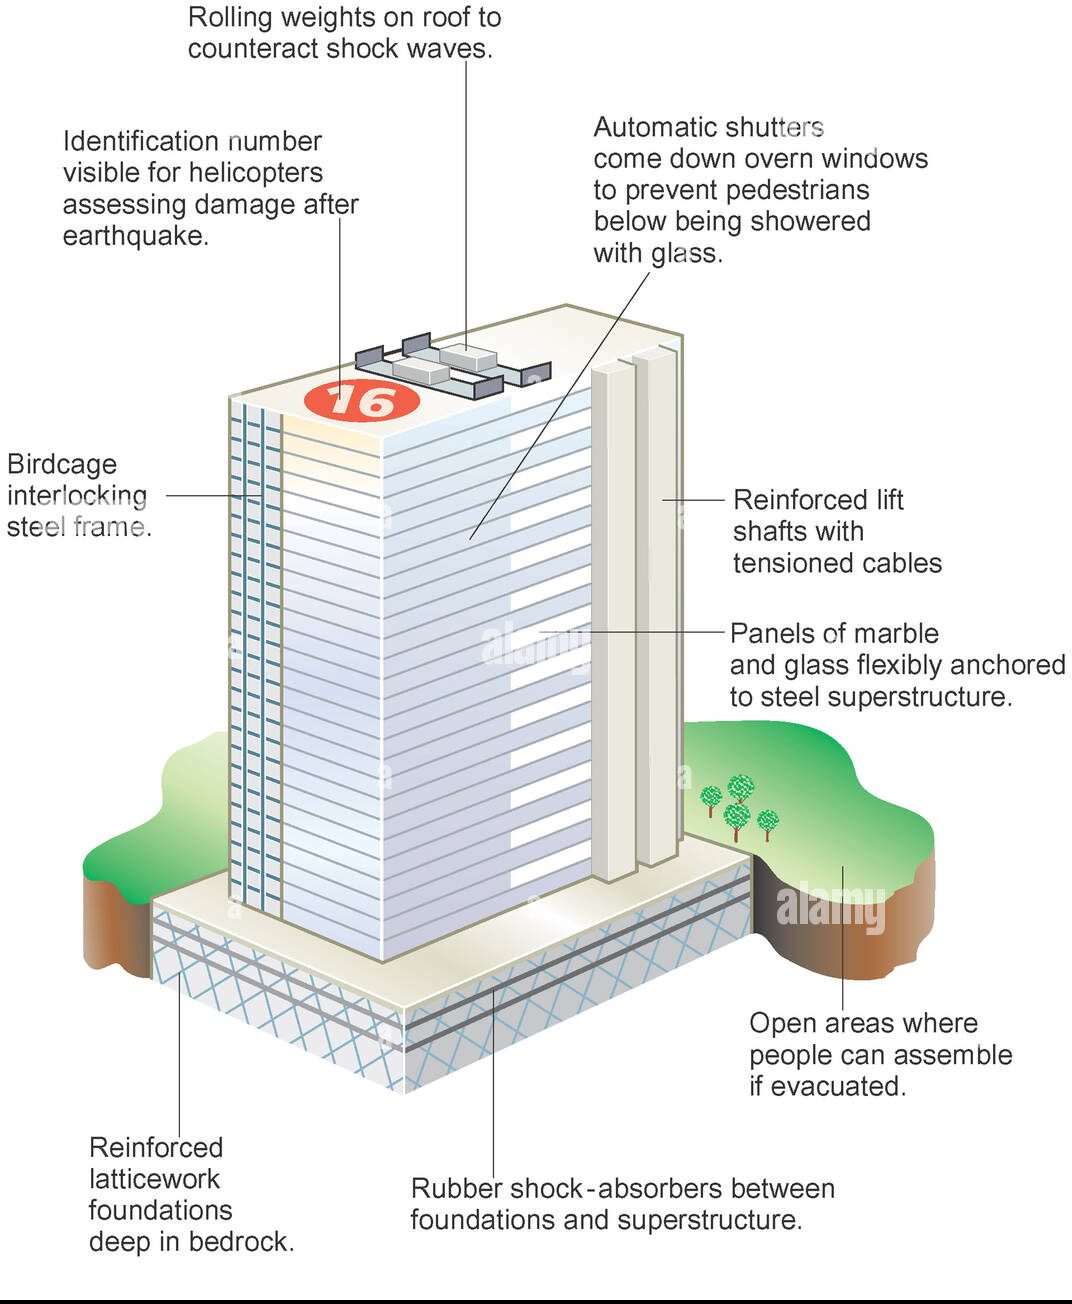 Smart Buildings and Disaster Resilience: Lessons from Natural Disasters